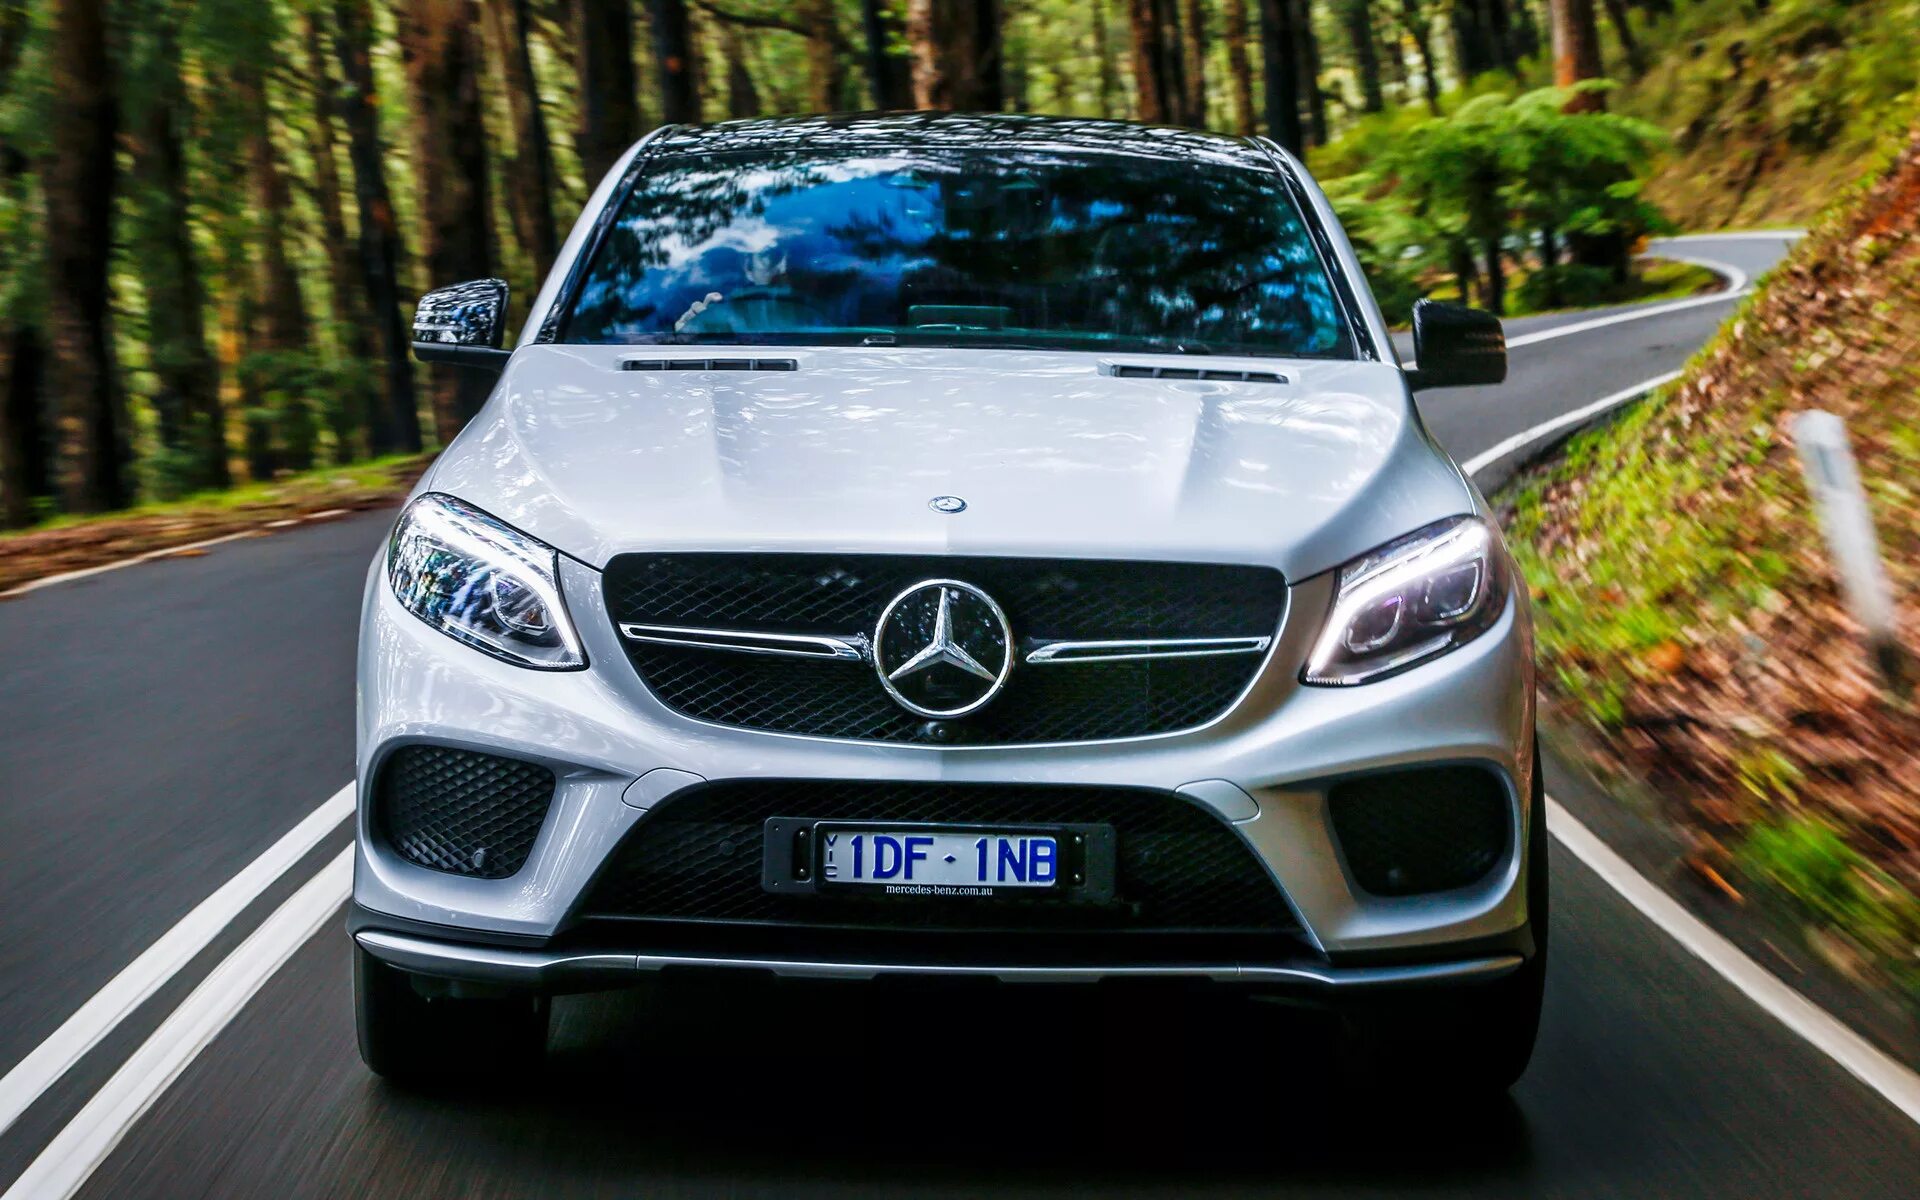 Mercedes AMG 450. Mercedes gl450 AMG. Mercedes AMG 2015. Mercedes Benz Coupe 450 matic. Мерседес бенц 2015 года